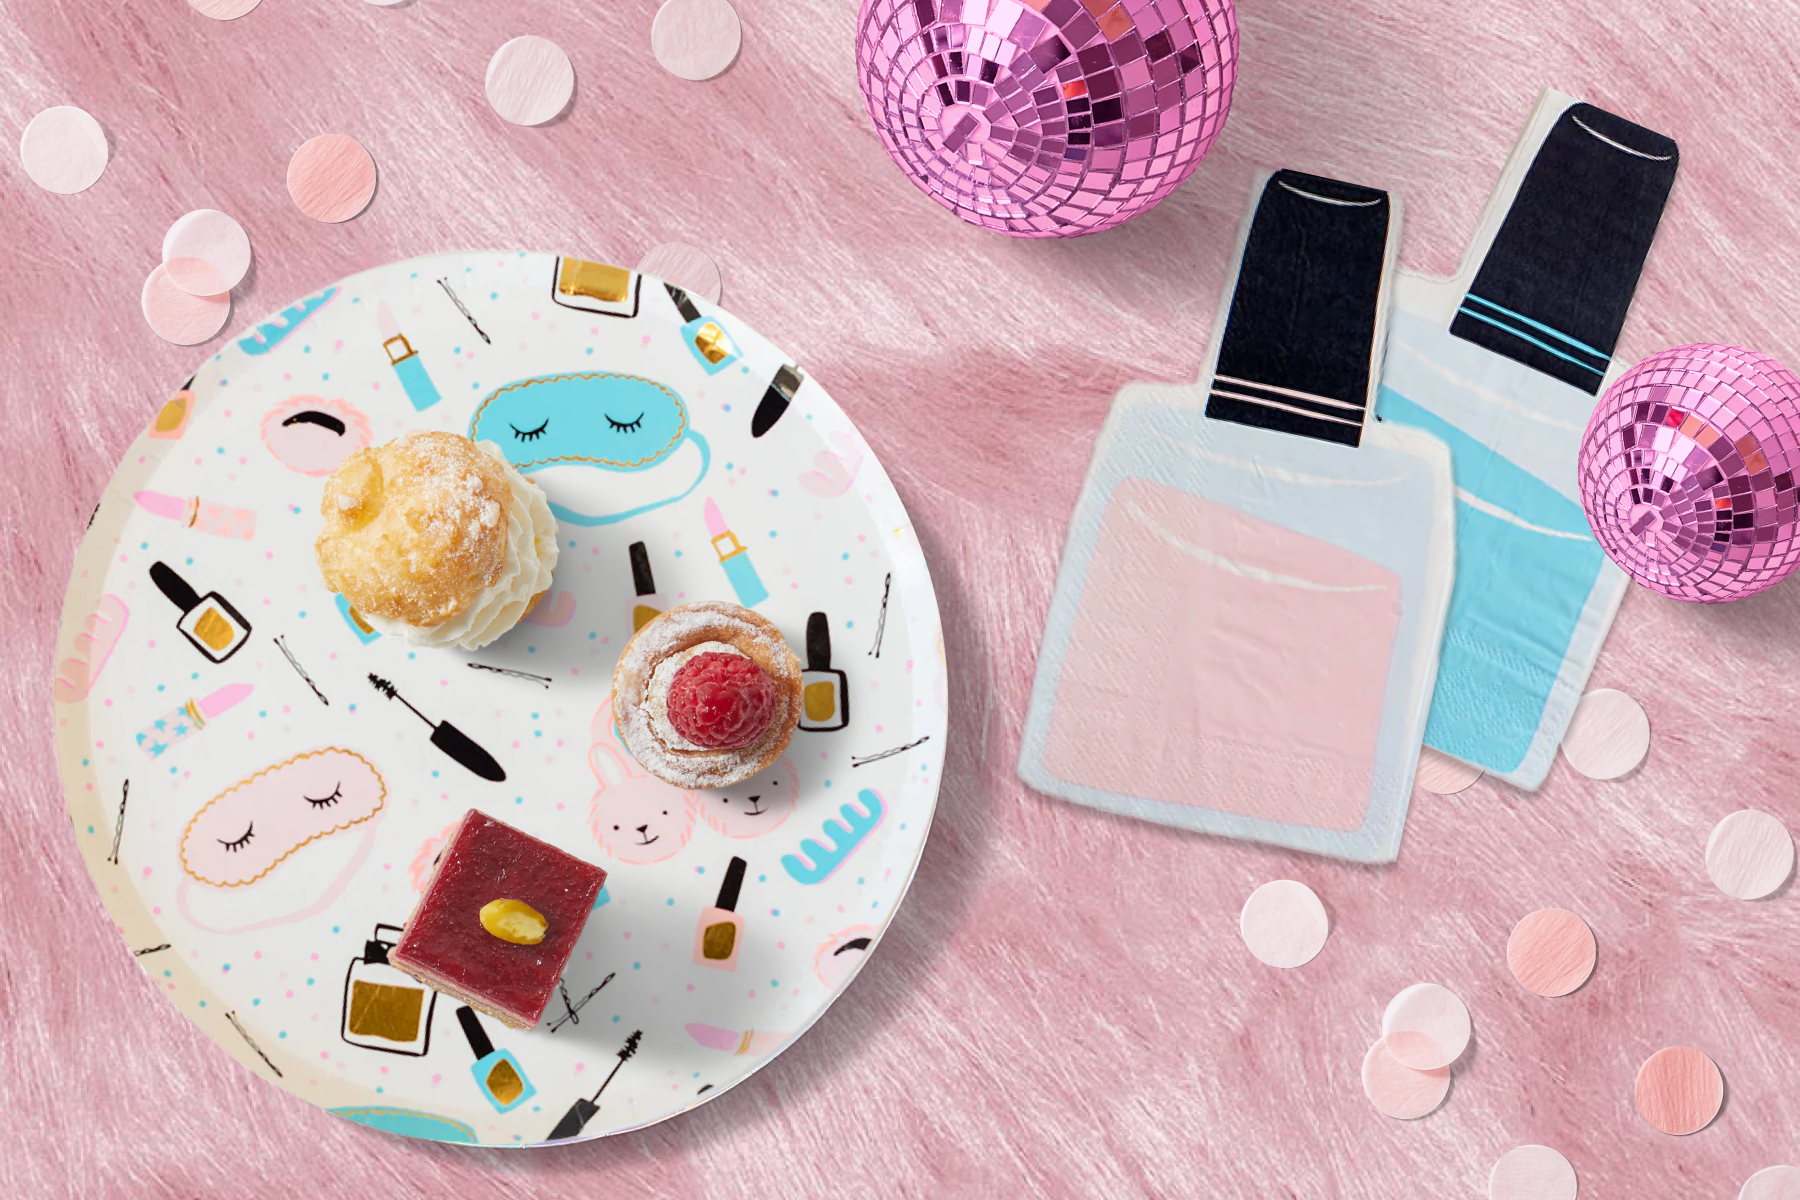 Slumber party-themed paper plate and nail polish bottle-shaped napkins with small baked treats and pink disco balls.